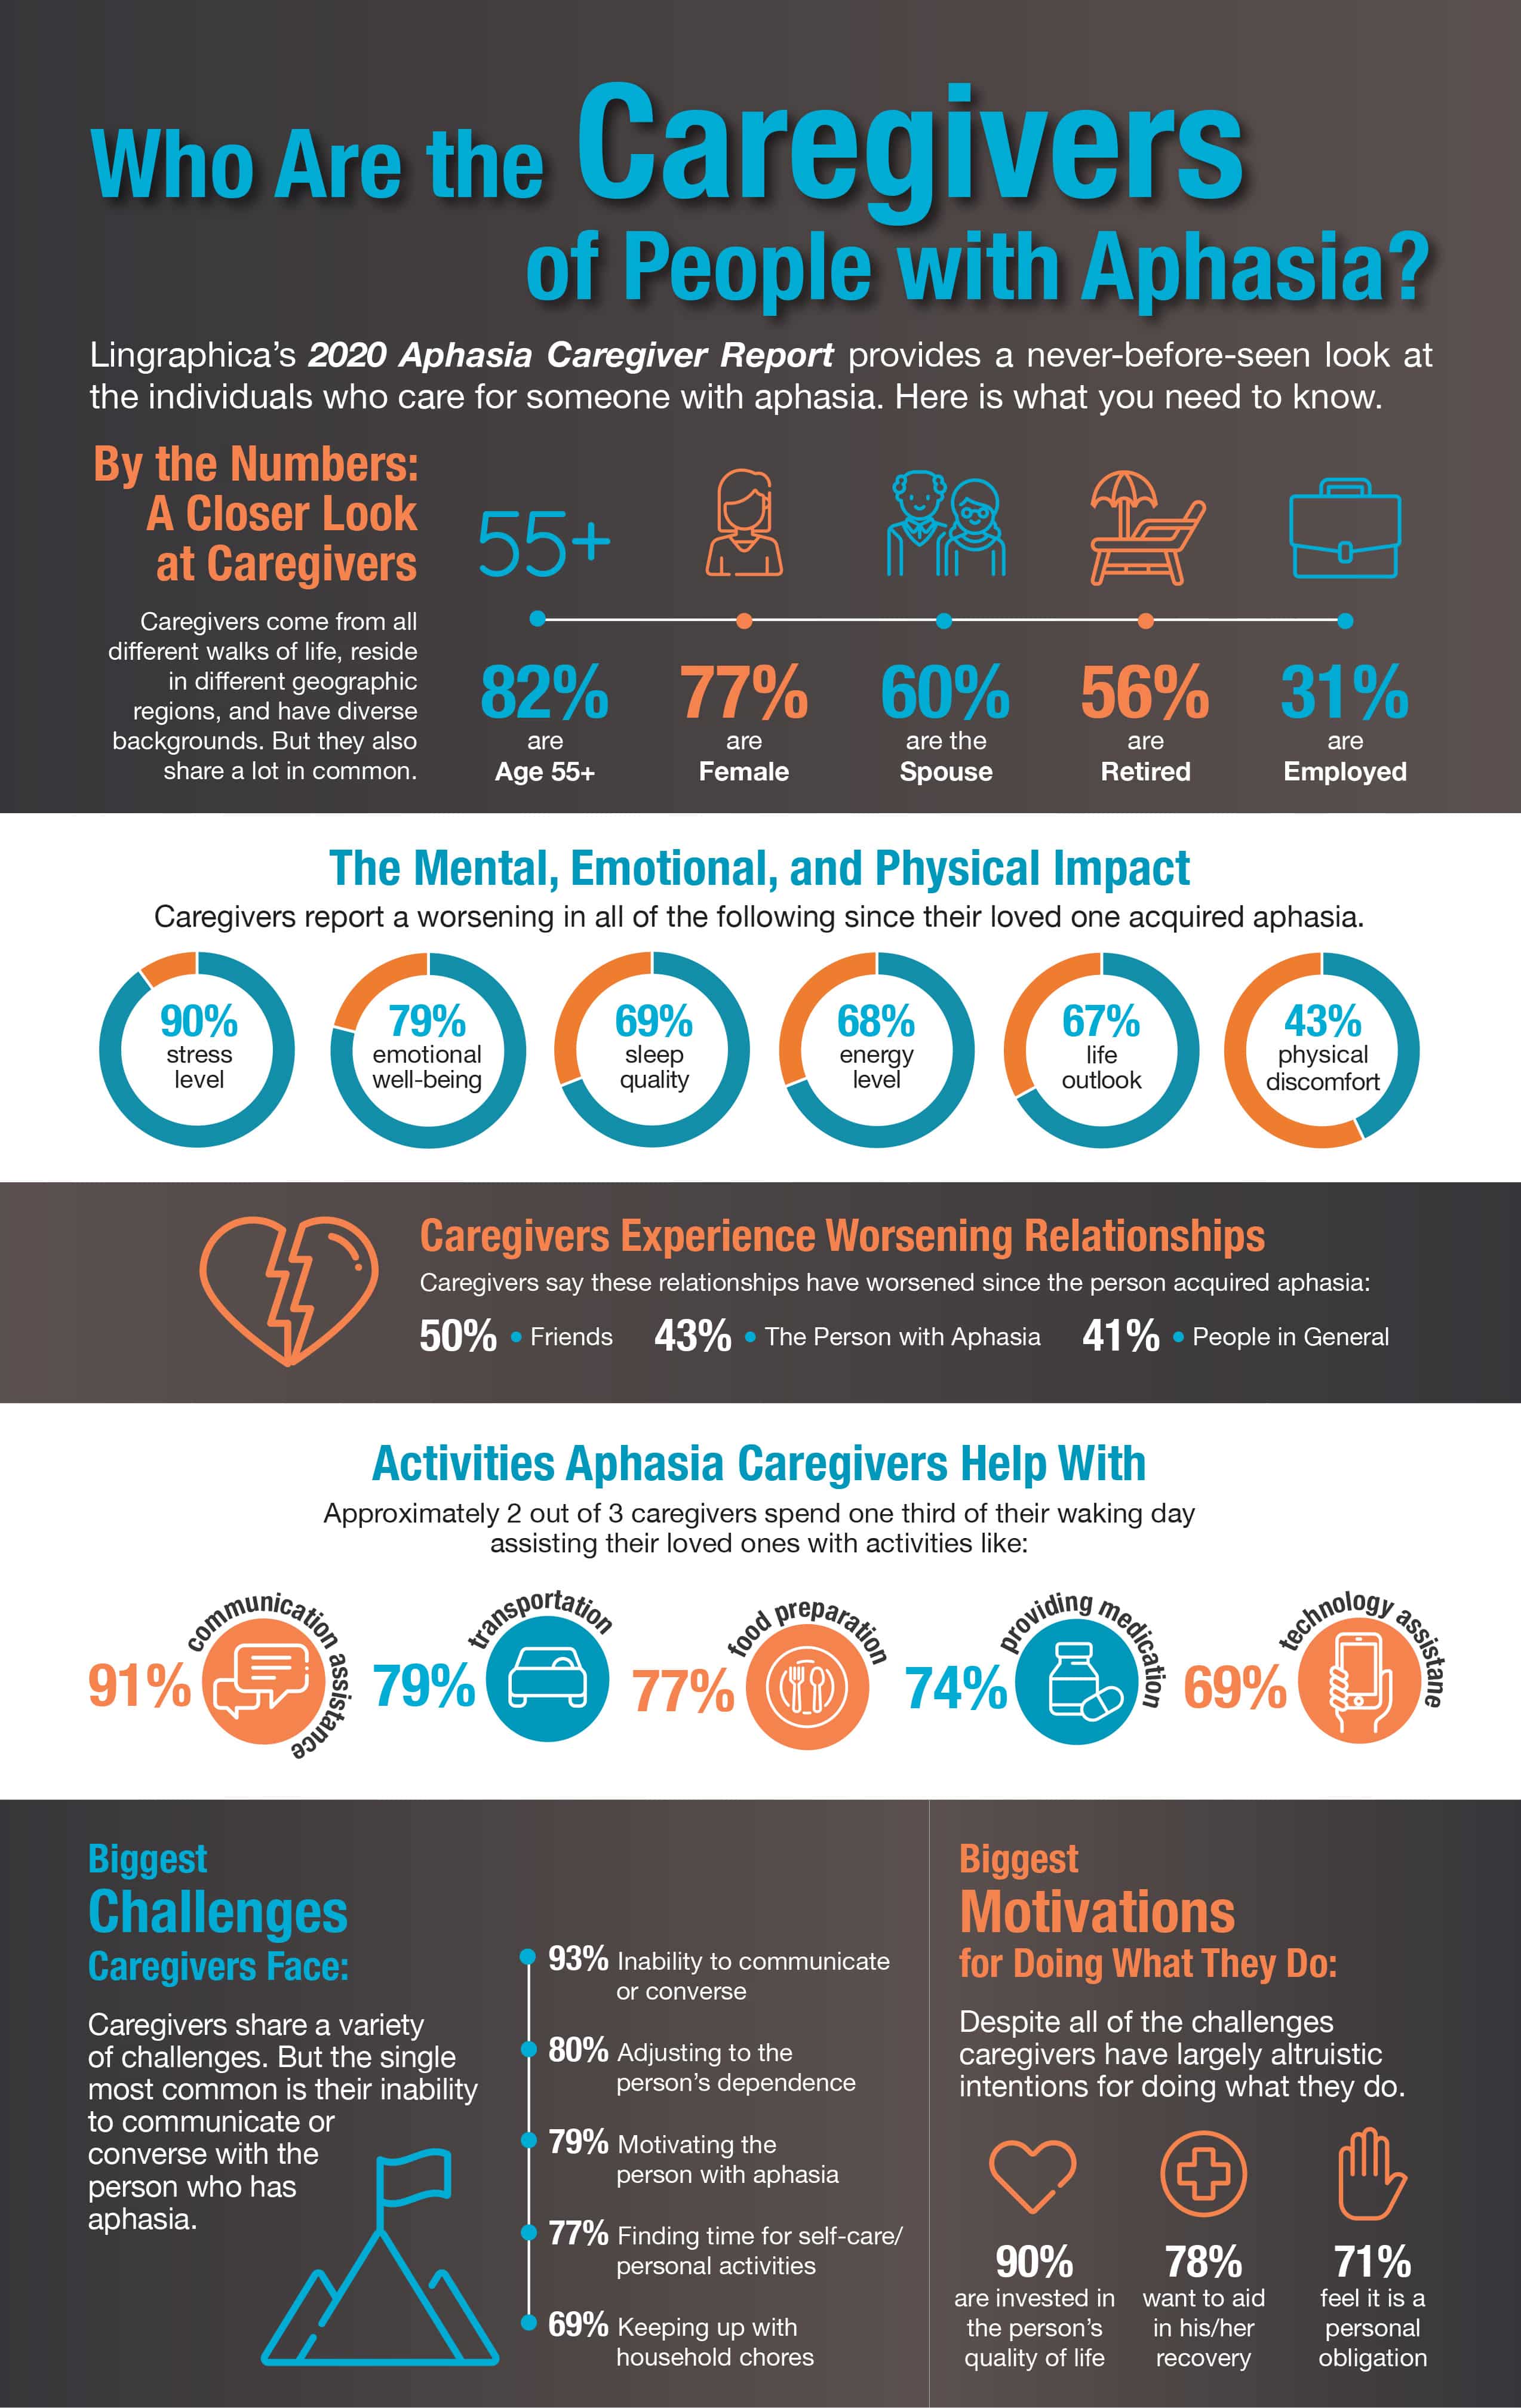 Infographic breaking down Lingraphica’s 2020 Aphasia Caregiver Report